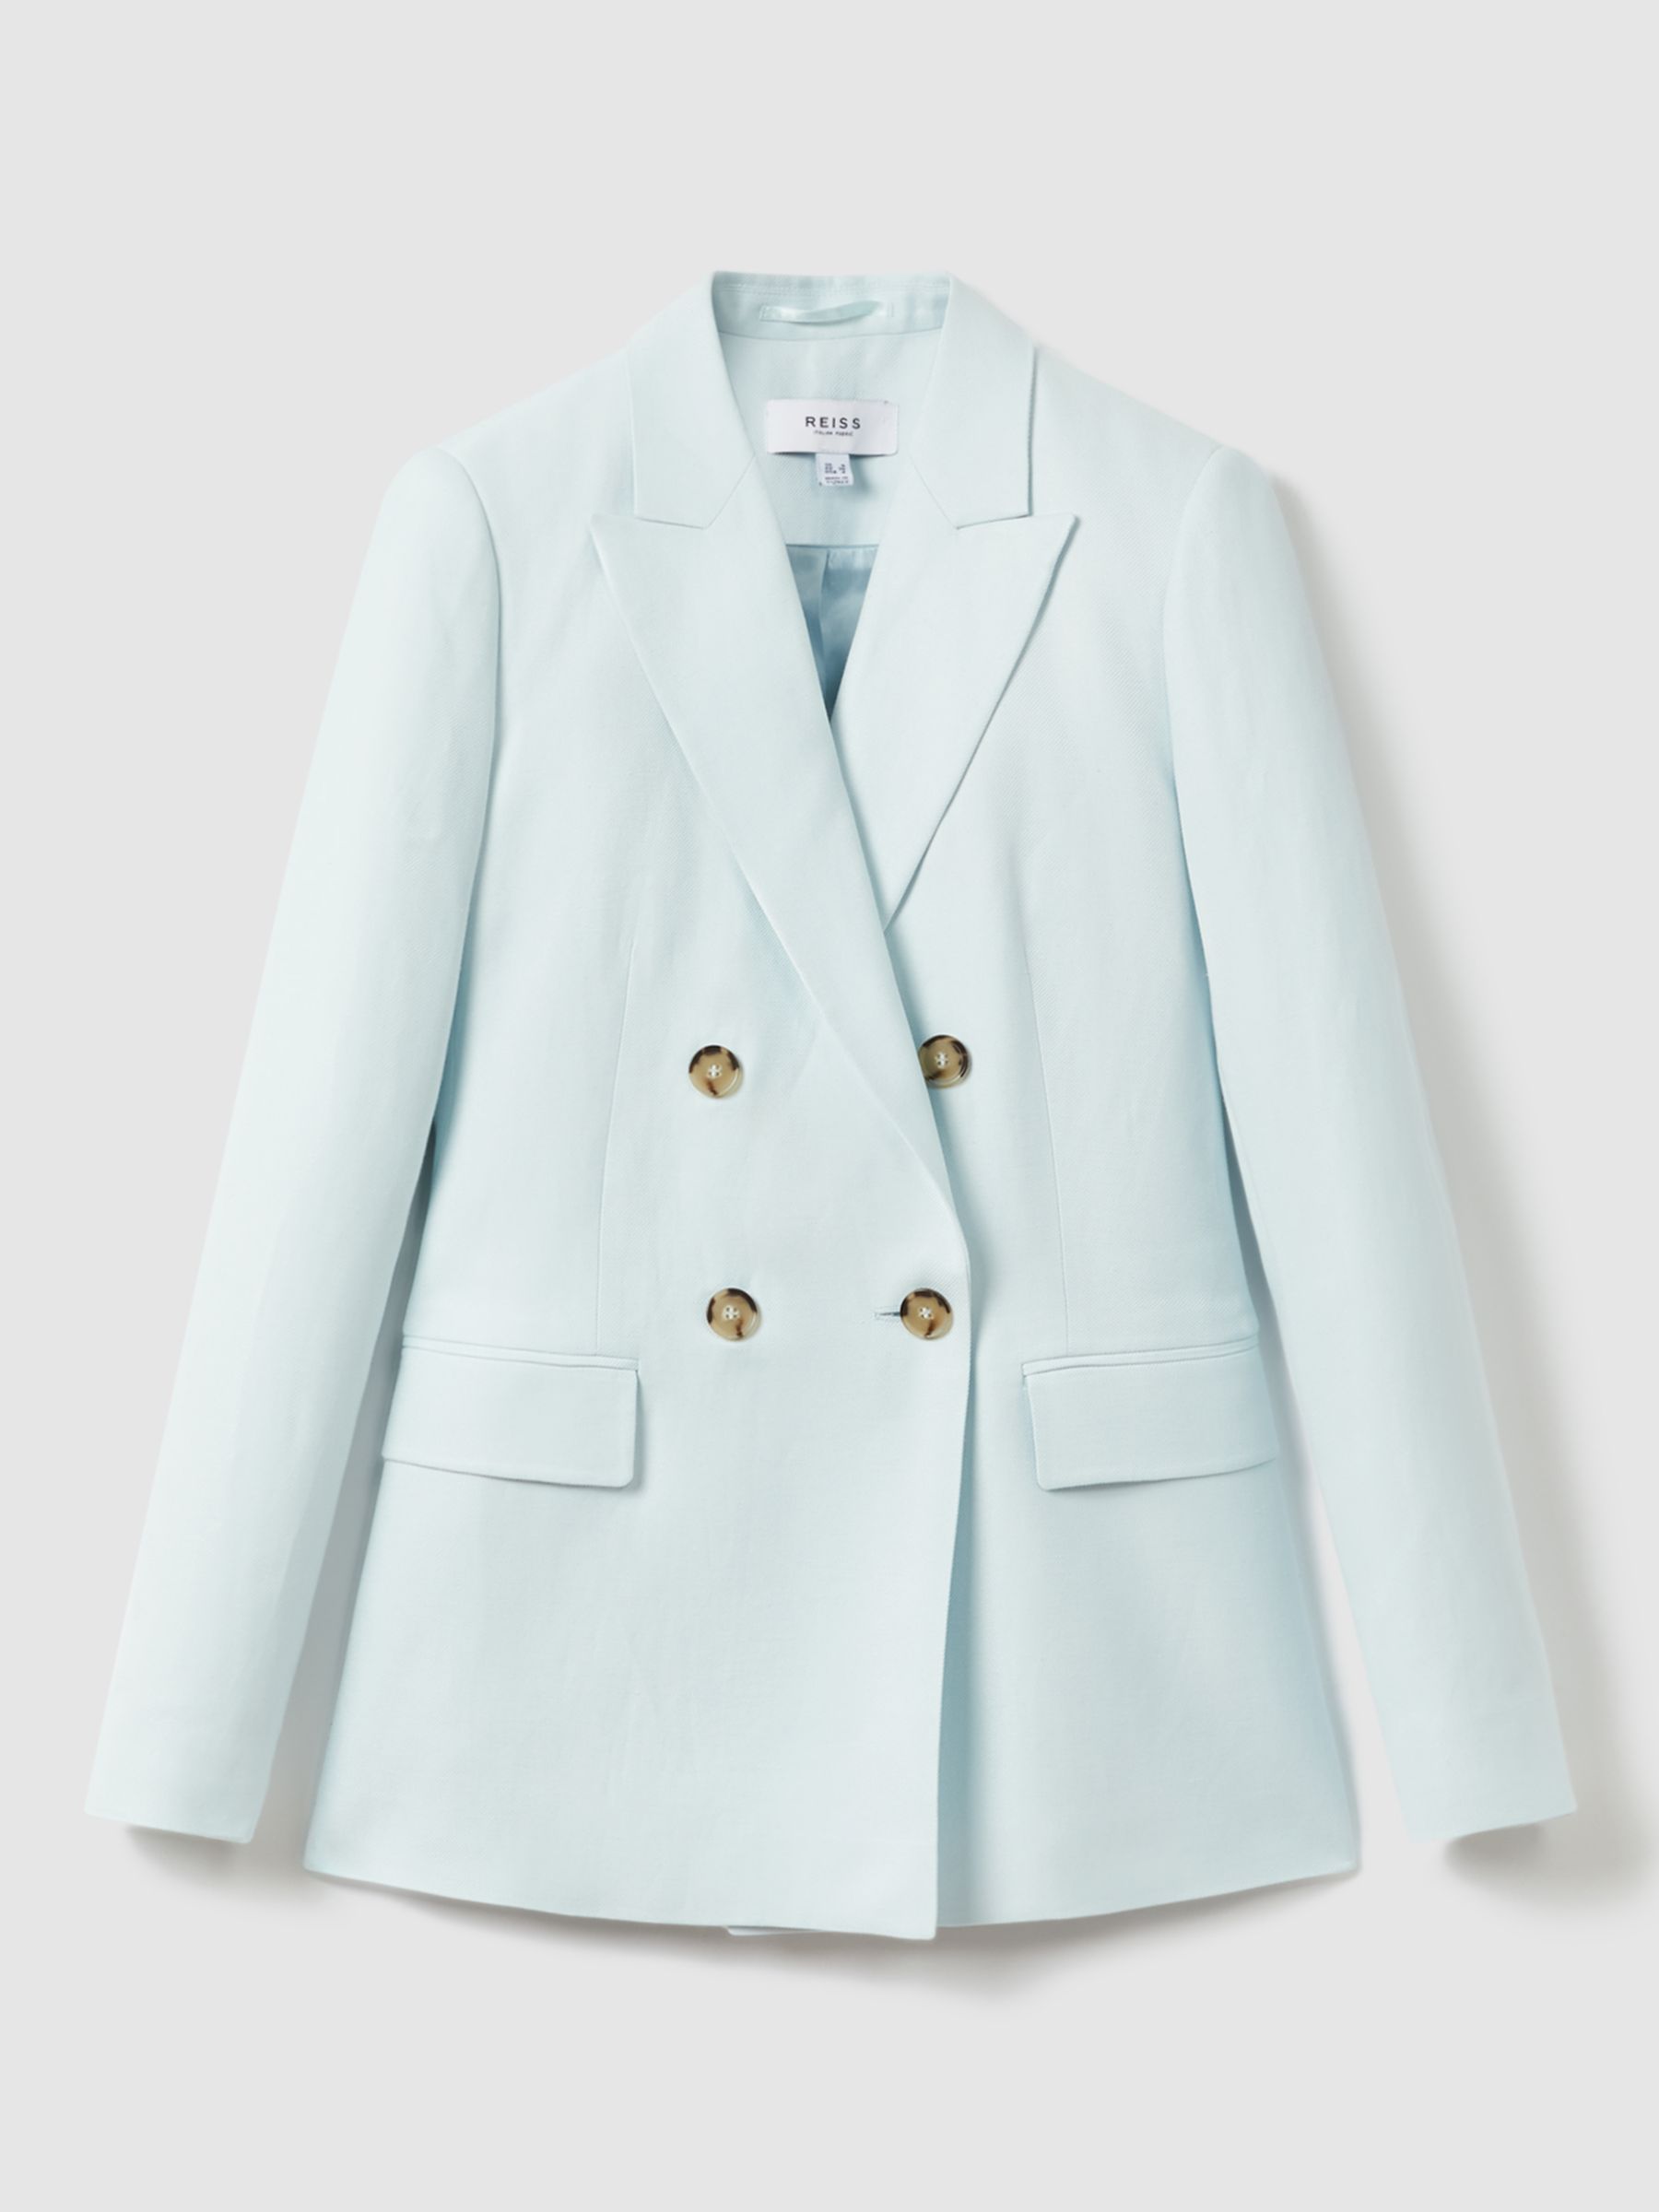 Buy Reiss Petite Lori Linen Blend Double Breasted Blazer Online at johnlewis.com